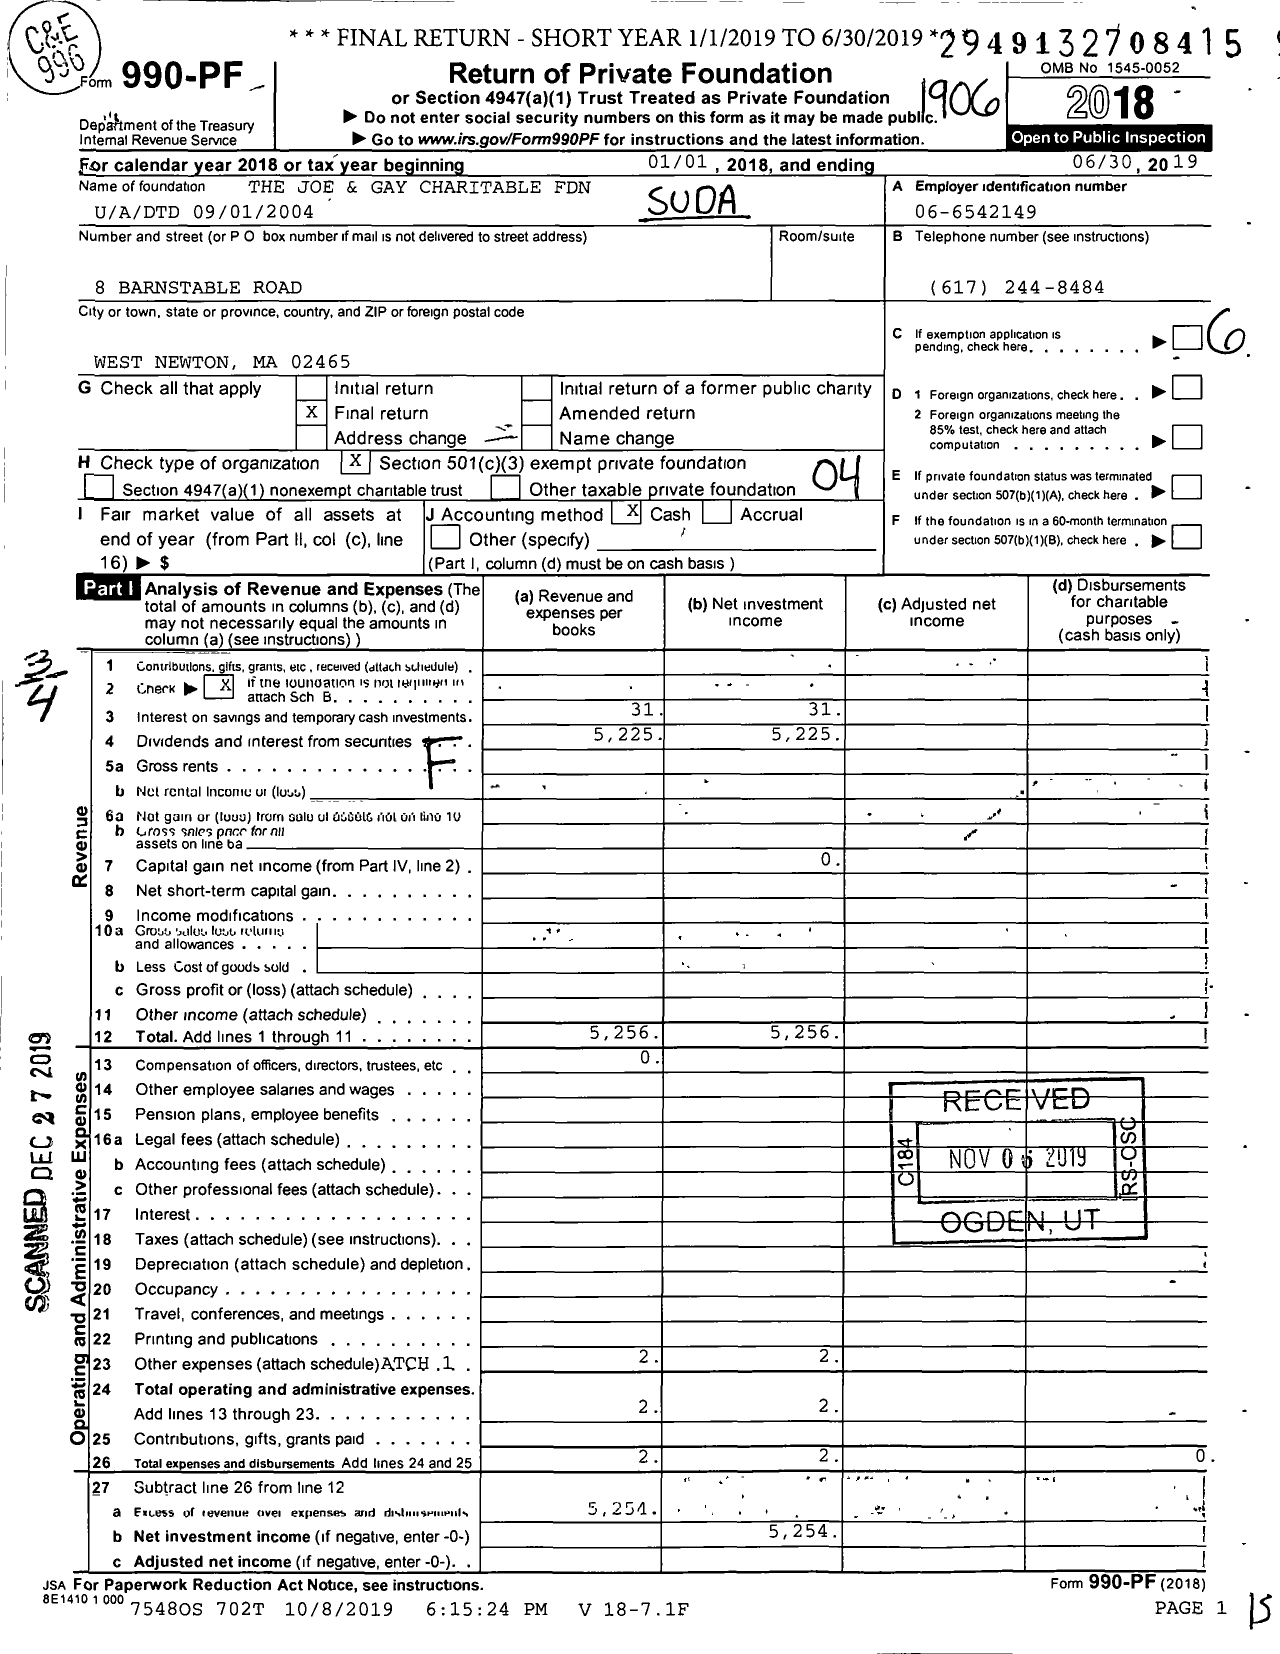 Image of first page of 2018 Form 990PF for The Joe and Gay Charitable Foundation U / A / DTD 09 / 01 / 2004